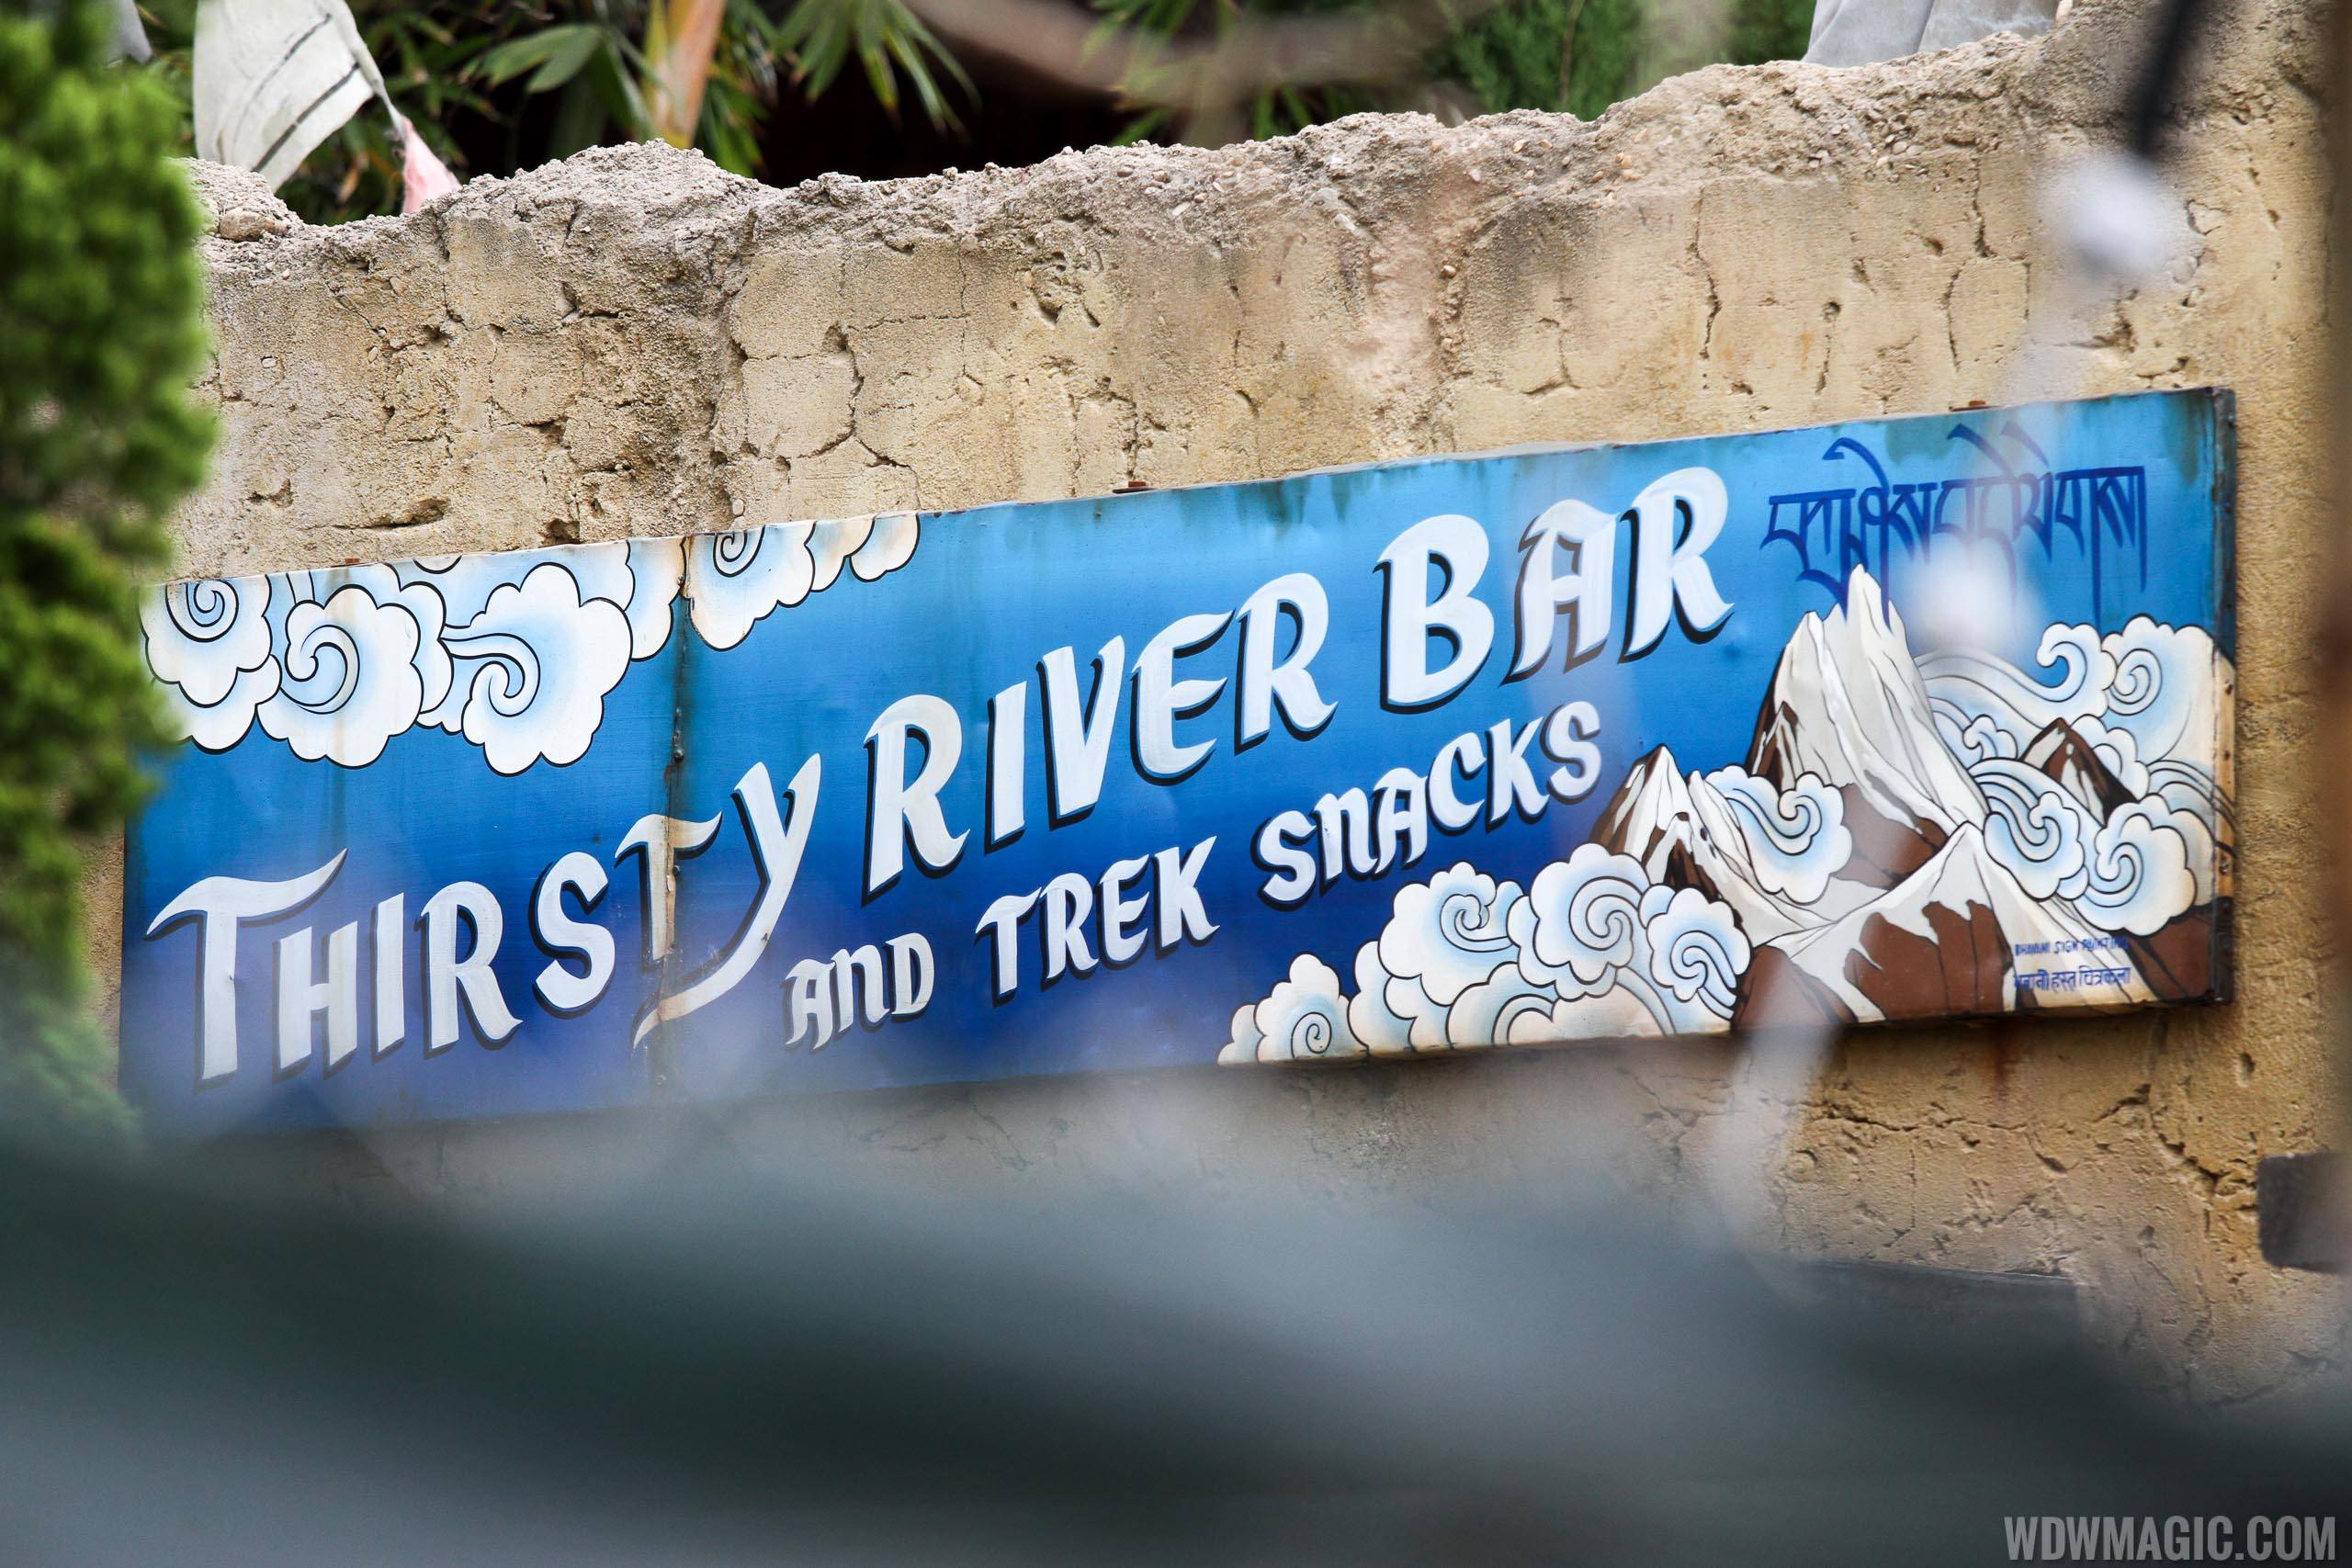 Thirsty River Bar and Trek Snacks construction